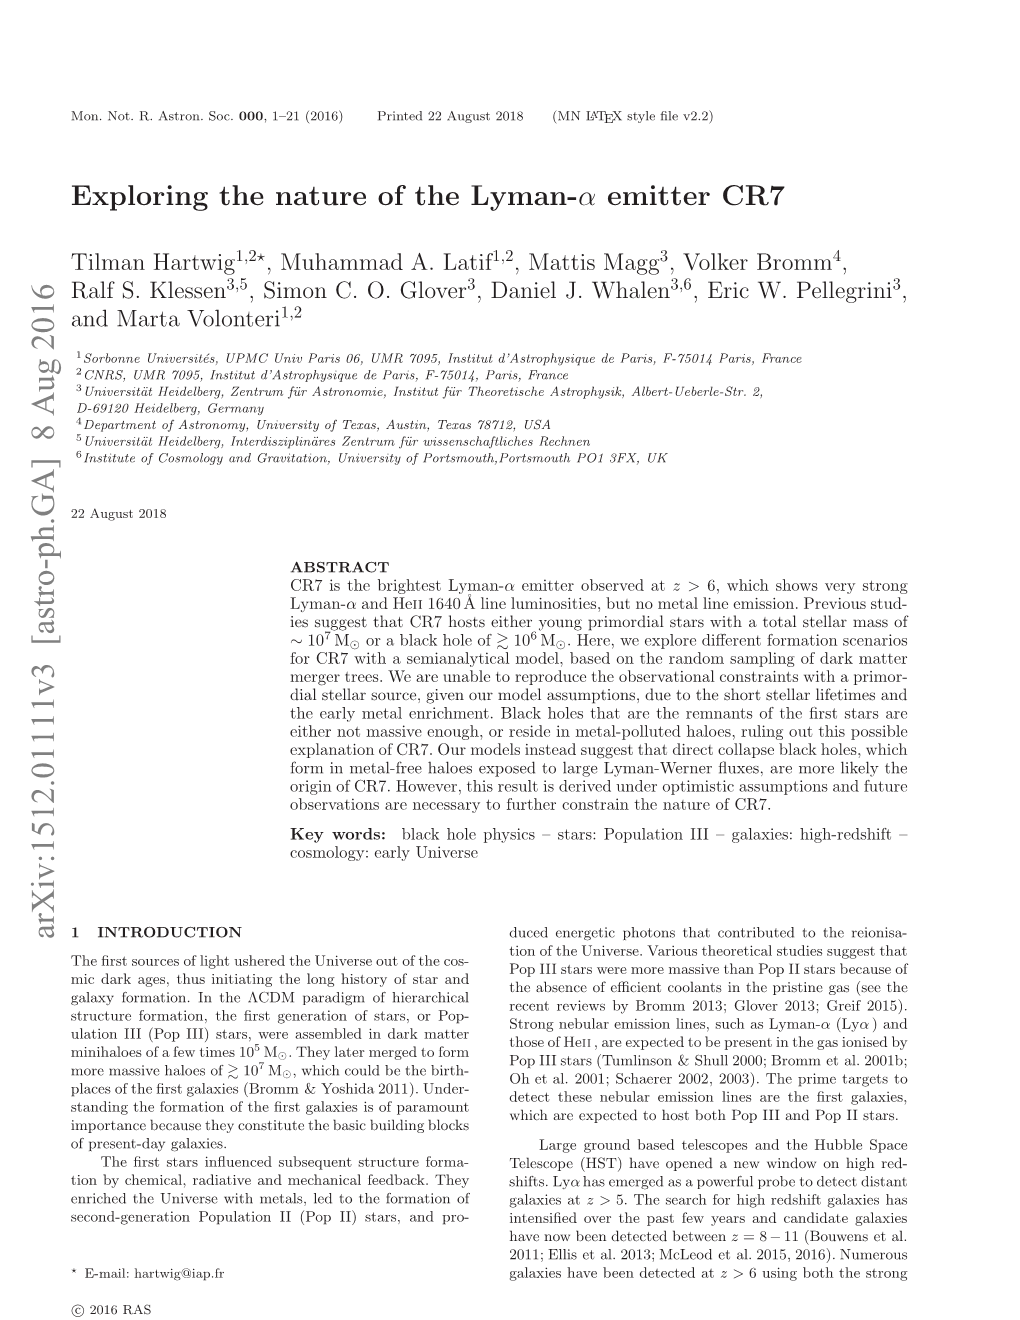 Exploring the Nature of the Lyman-Α Emitter